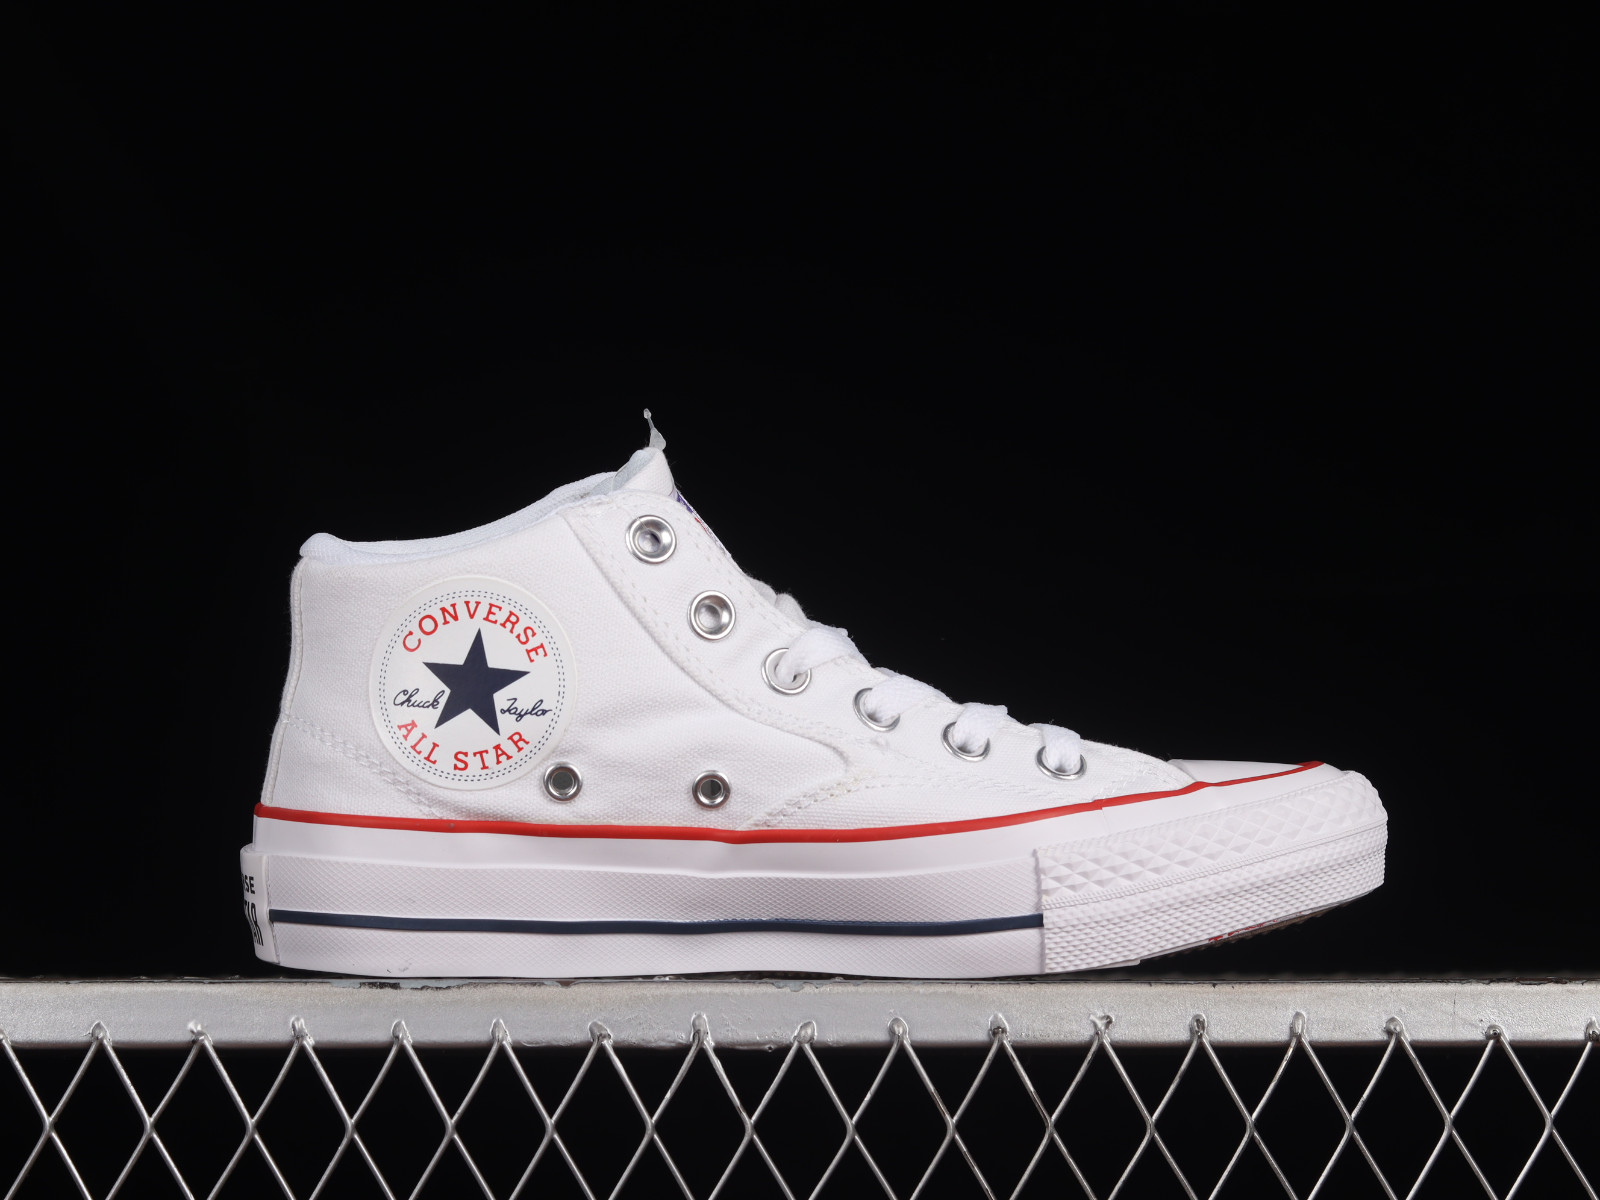 Converse Chuck Taylor All Star Malden Street White Red Blue A00812C -  GmarShops